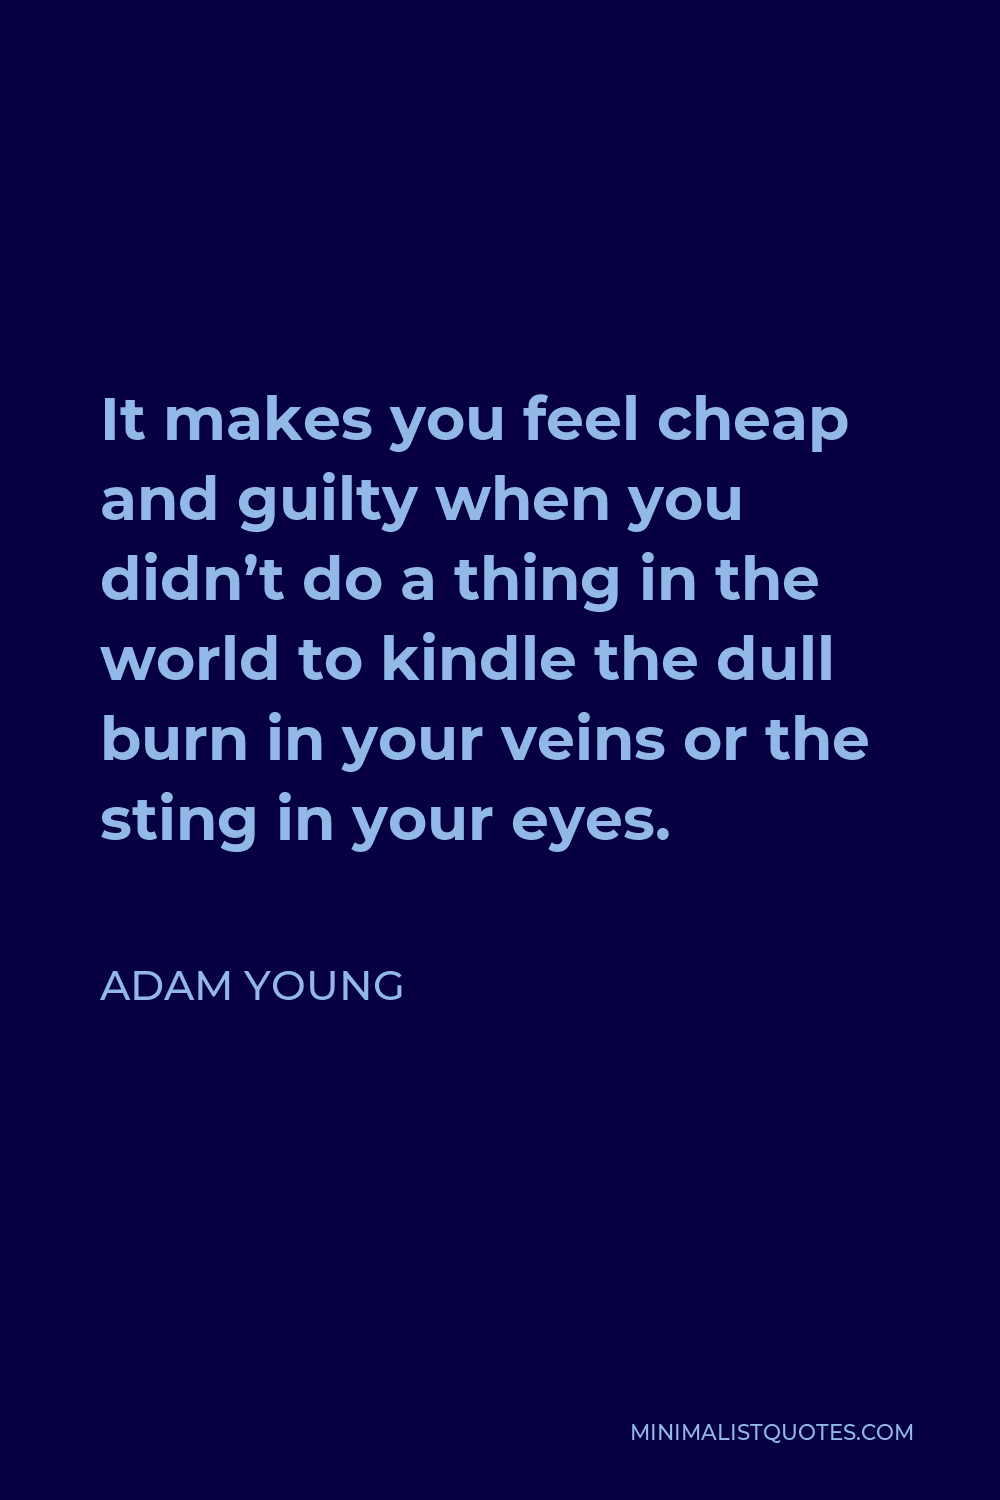 Adam Young Quote - It makes you feel cheap and guilty when you didn’t do a thing in the world to kindle the dull burn in your veins or the sting in your eyes.